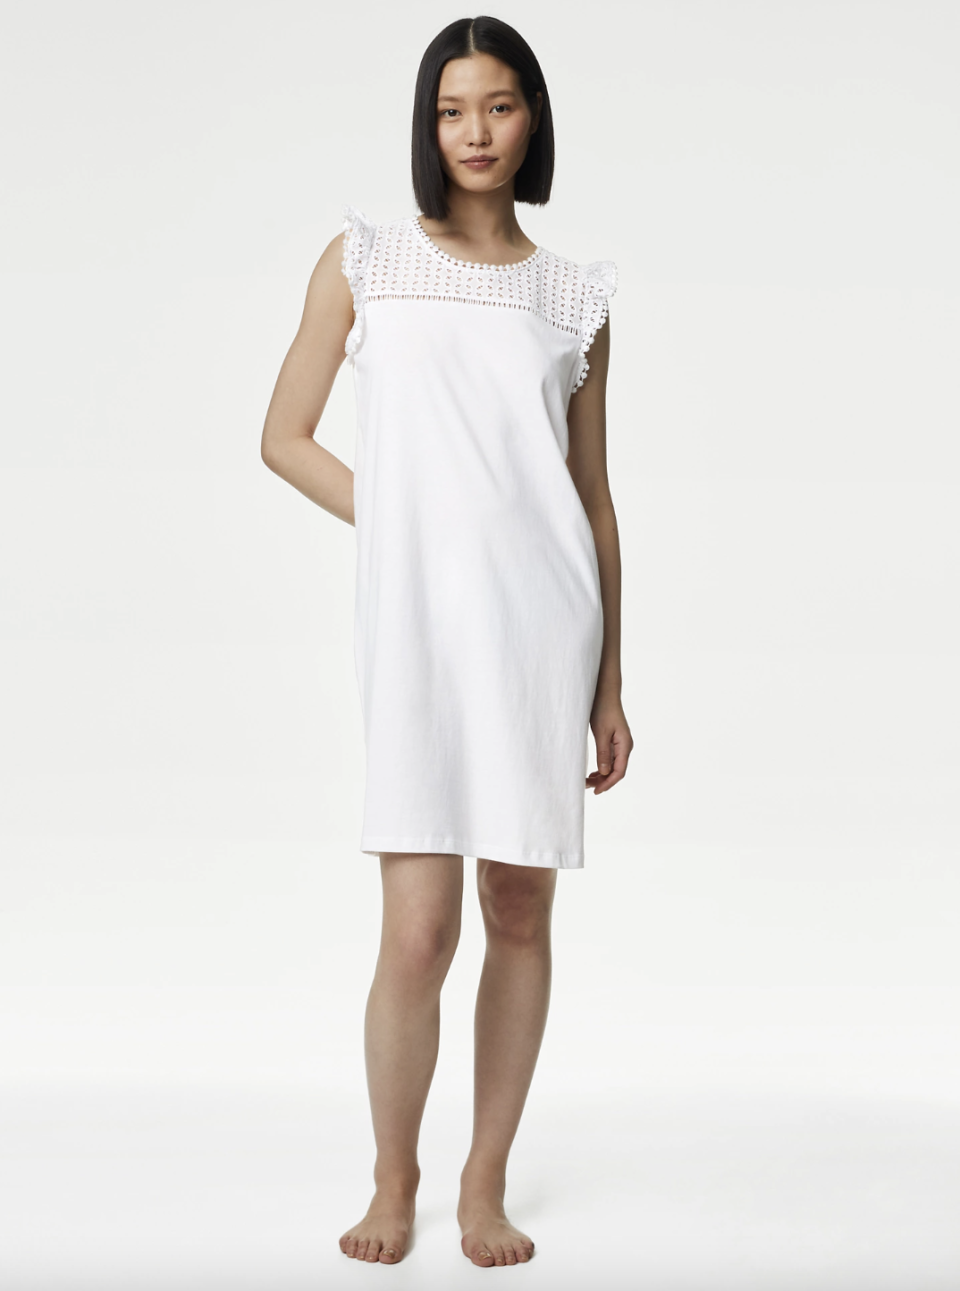 Shoppers say this nightdress is comfortable, flattering and washes well. (Marks & Spencer)